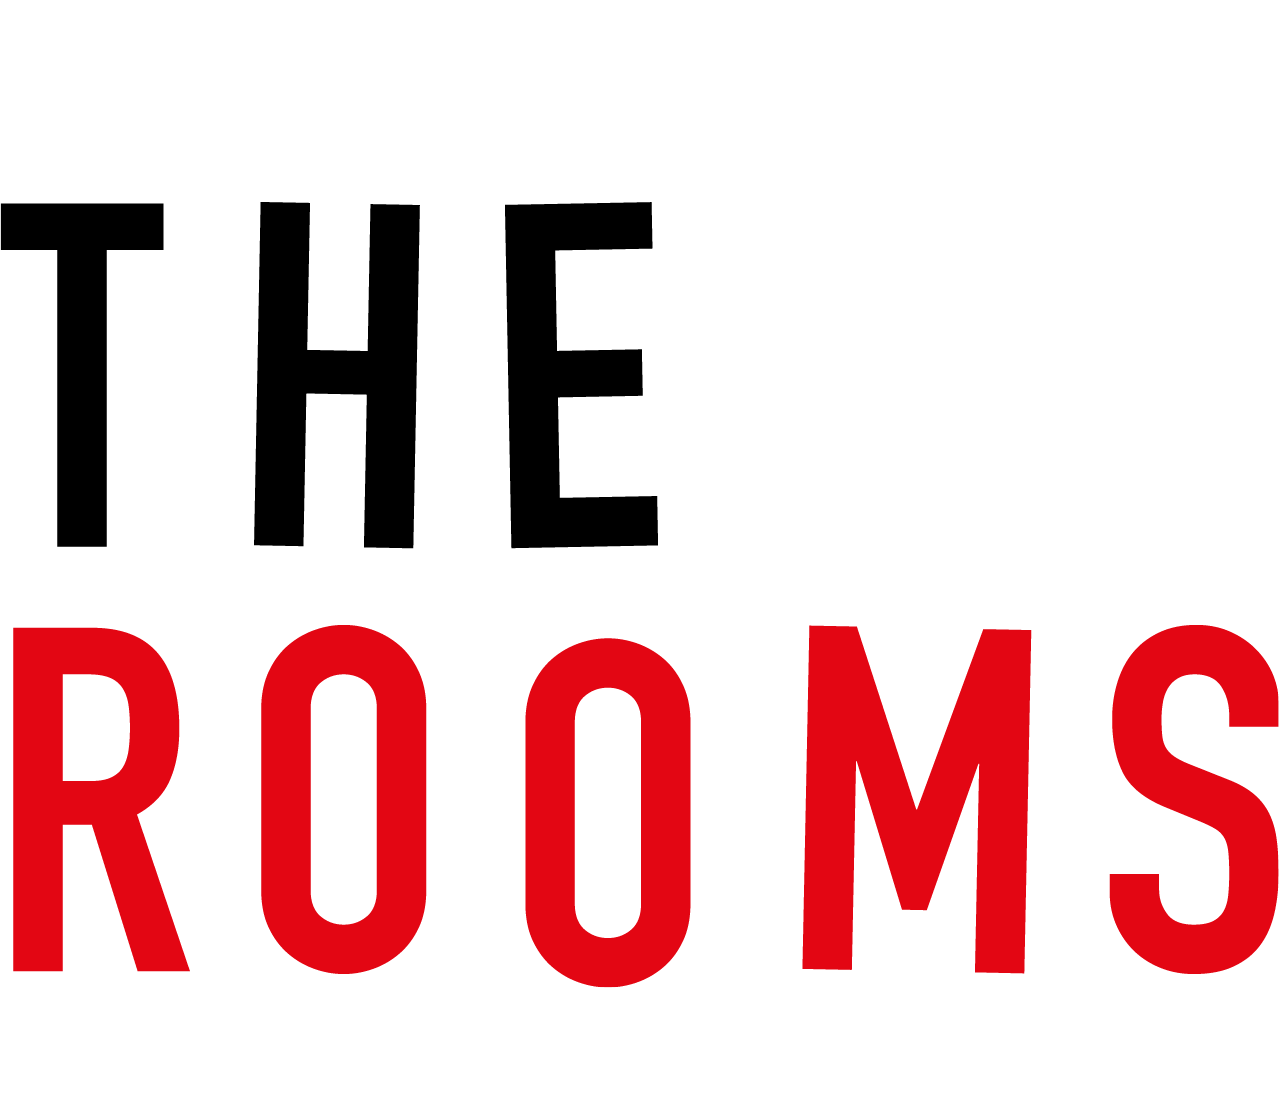 The Rooms text logo